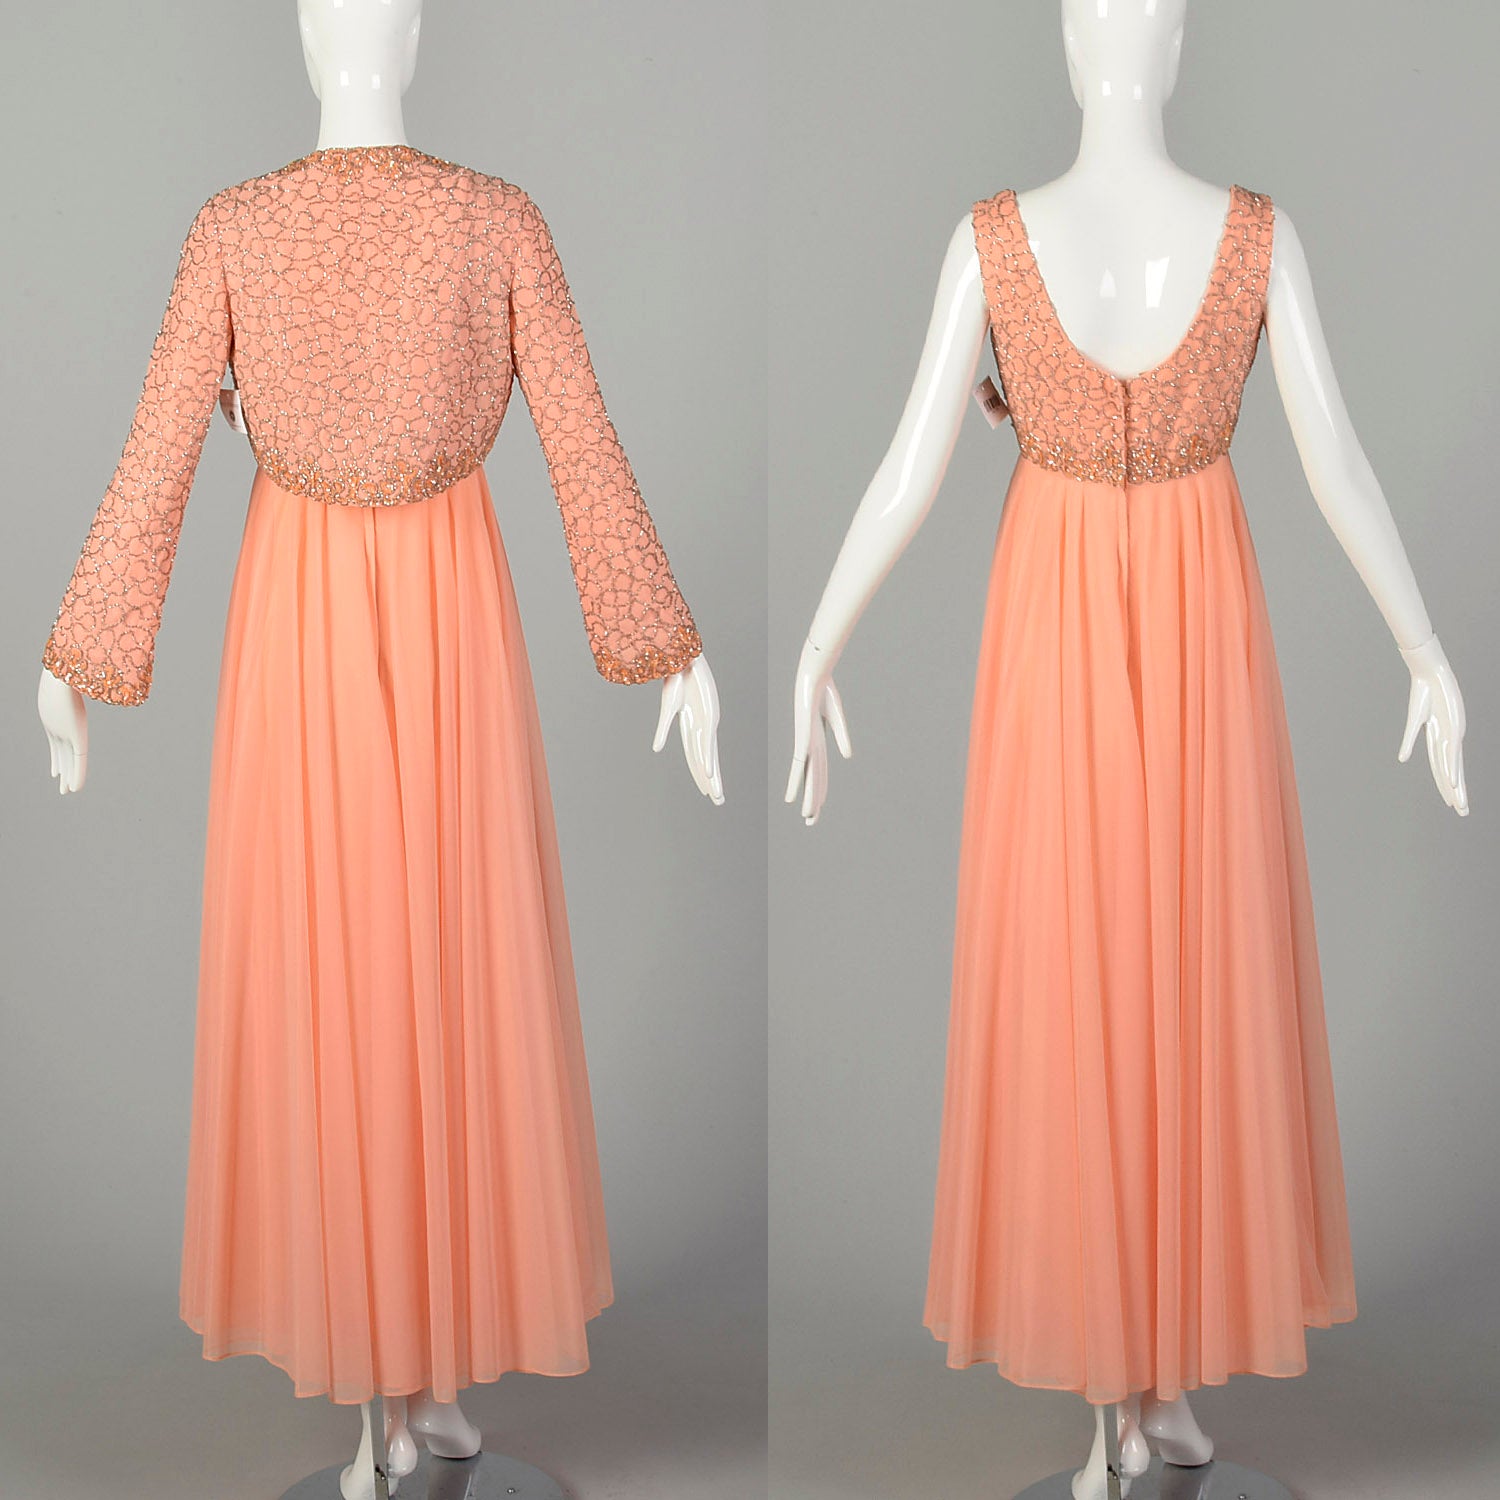 Small 1970s Mike Benet Set 2pc Orange Beaded Jacket Modest Maxi Prom Dress Formal Gown